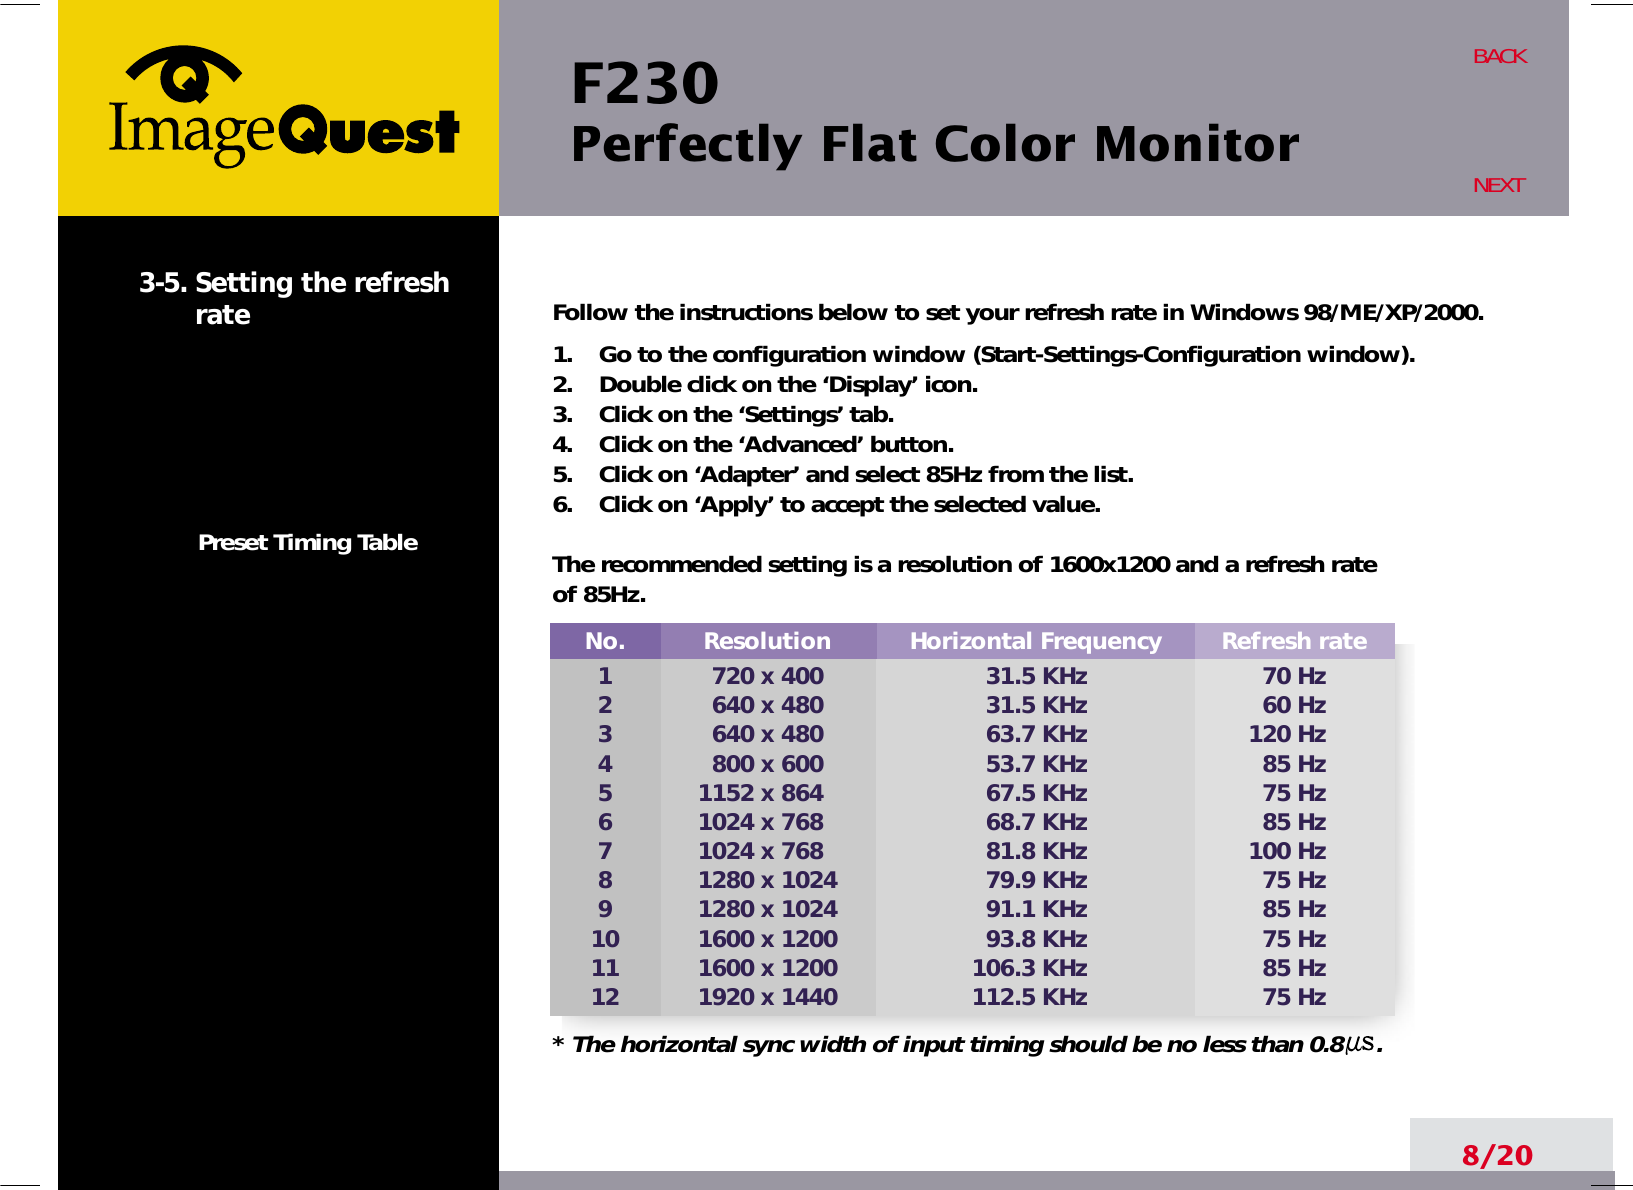 F230 Perfectly Flat Color Monitor8/20BACKNEXT3-5. Setting the refreshratePreset Timing TableNo.123456789101112Resolution720 x 400640 x 480640 x 480800 x 6001152 x 8641024 x 7681024 x 7681280 x 10241280 x 10241600 x 12001600 x 12001920 x 1440Horizontal Frequency31.5 KHz31.5 KHz63.7 KHz53.7 KHz67.5 KHz68.7 KHz81.8 KHz79.9 KHz91.1 KHz93.8 KHz106.3 KHz112.5 KHzRefresh rate70 Hz60 Hz120 Hz85 Hz75 Hz85 Hz100 Hz75 Hz85 Hz75 Hz85 Hz75 HzFollow the instructions below to set your refresh rate in Windows 98/ME/XP/2000.1.    Go to the configuration window (Start-Settings-Configuration window).2.    Double click on the ‘Display’ icon.3.    Click on the ‘Settings’ tab.4.    Click on the ‘Advanced’ button.5.    Click on ‘Adapter’ and select 85Hz from the list.6.    Click on ‘Apply’ to accept the selected value.The recommended setting is a resolution of 1600x1200 and a refresh rate of 85Hz.* The horizontal sync width of input timing should be no less than 0.8     .